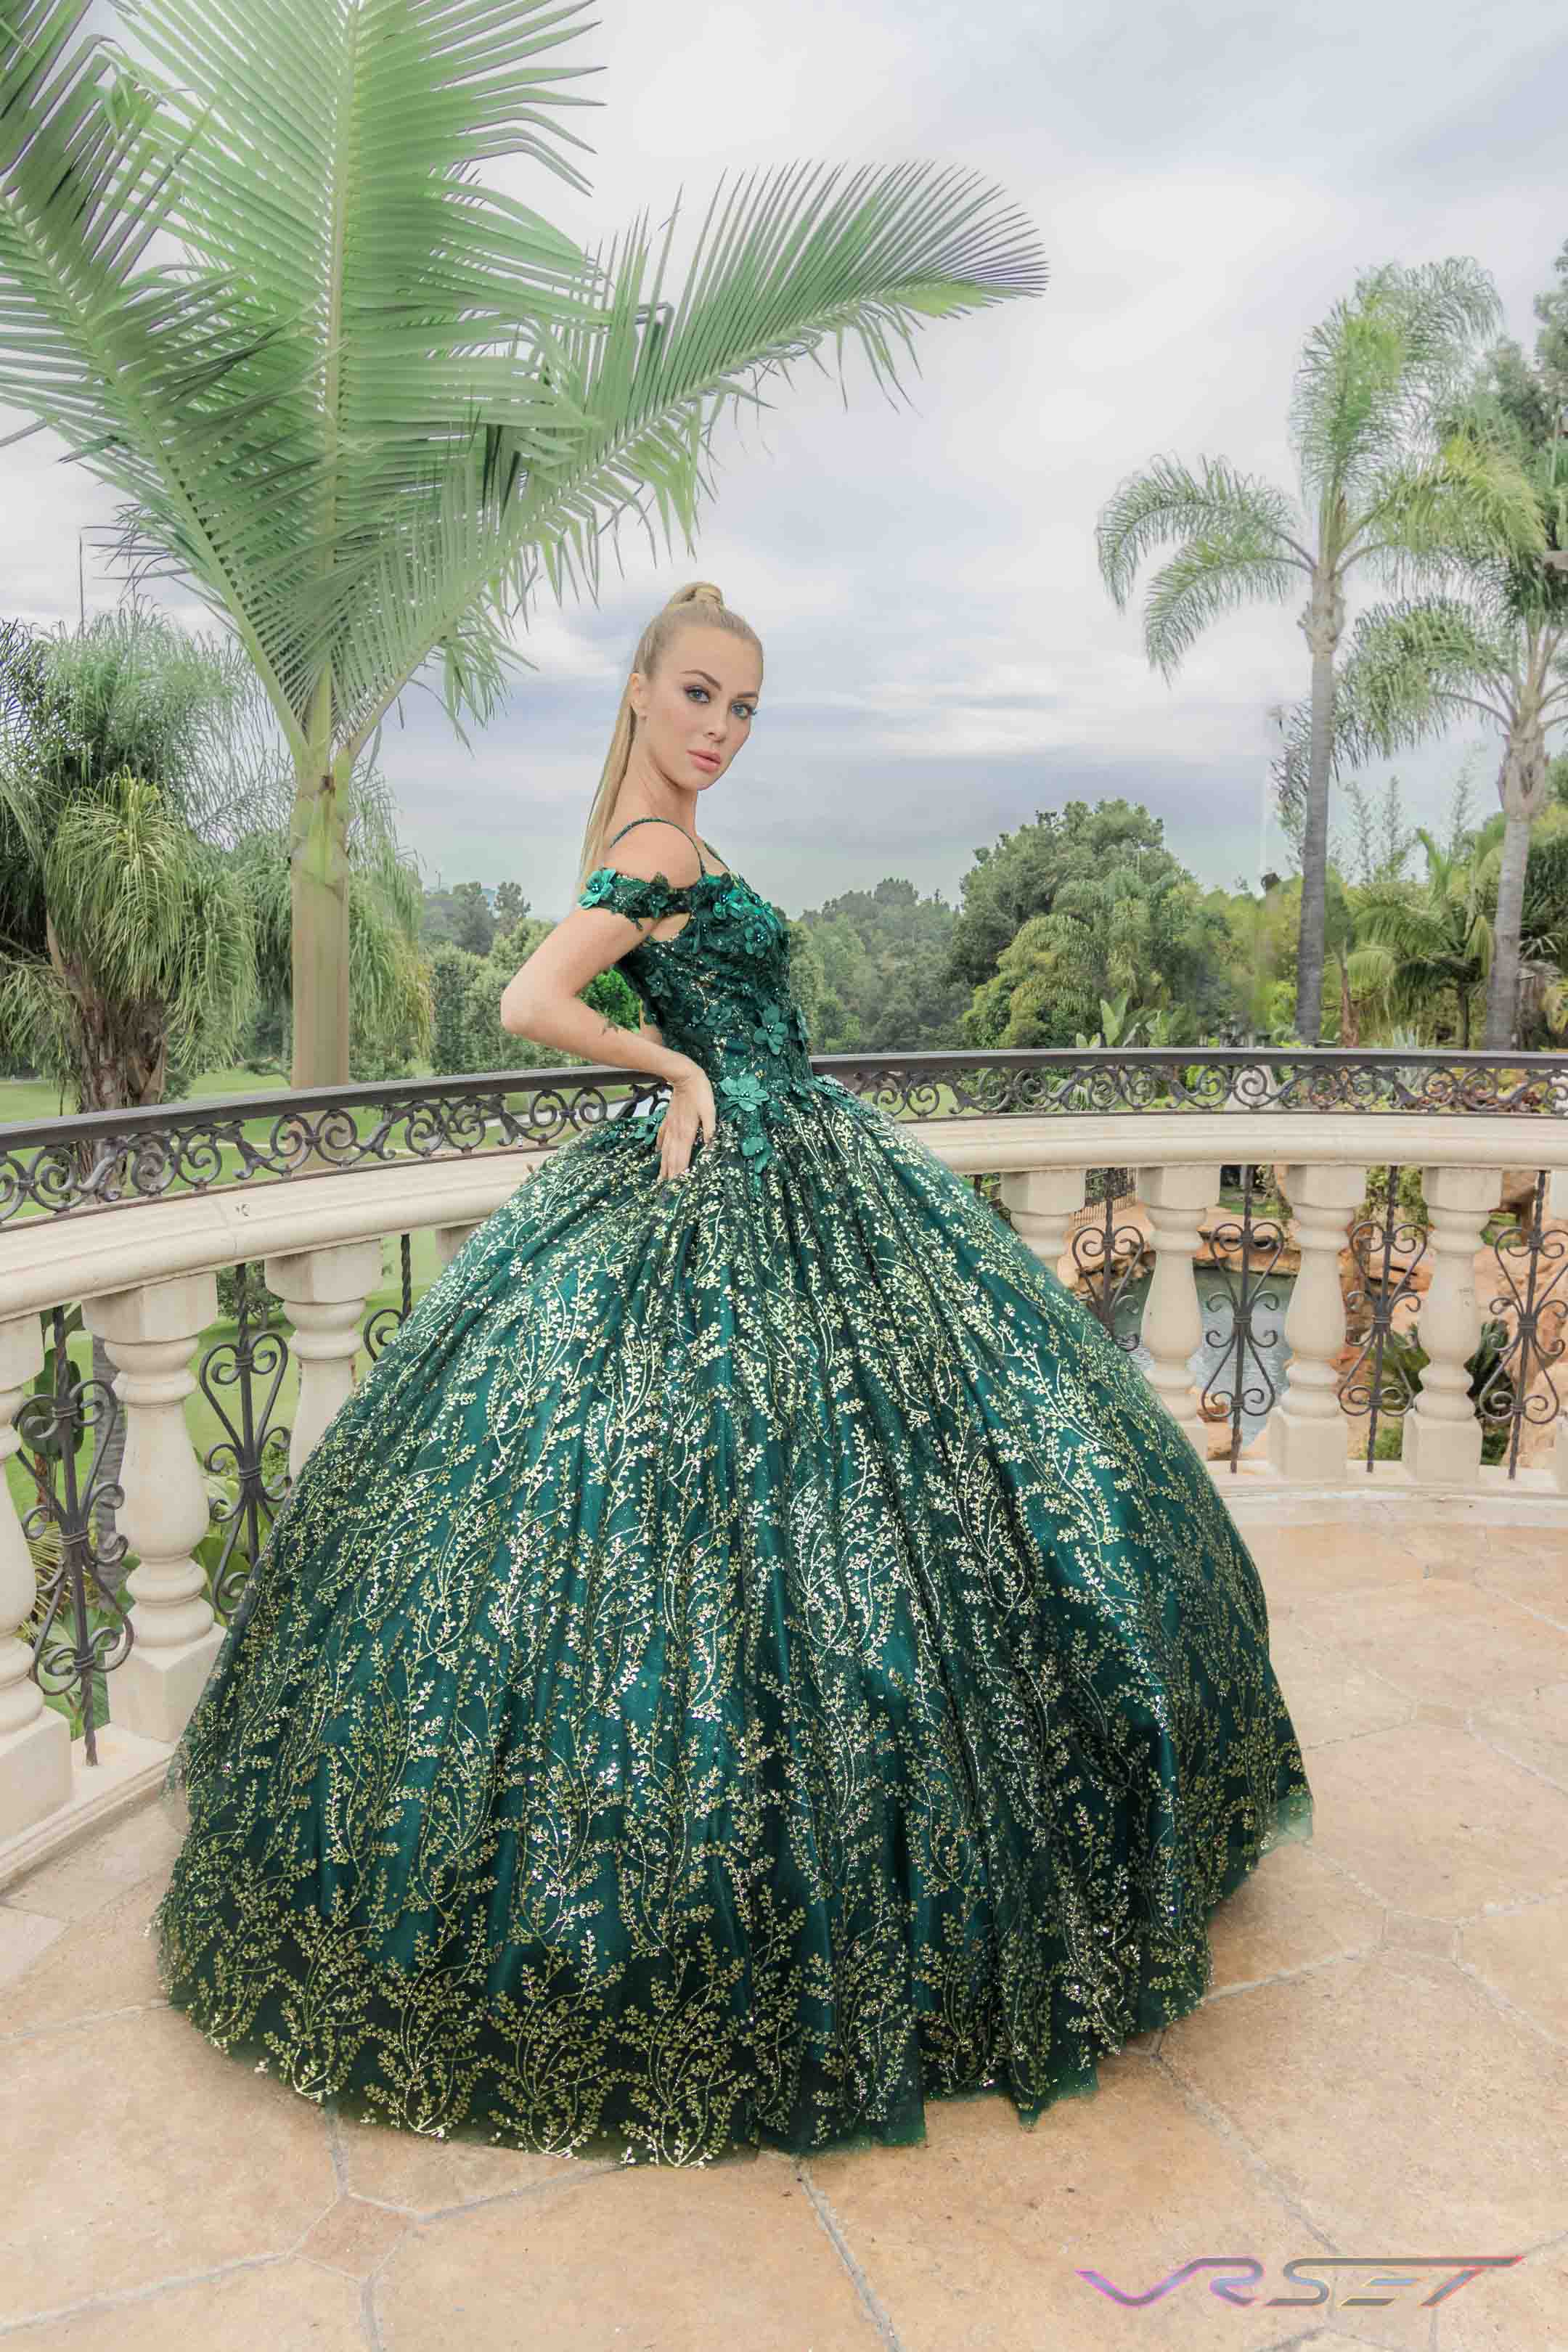 Jade Green Quinceanera Gown With Gold Embroidery On Model Lifestyle Brand Photo Session David Victory Clothing Photography Los Angeles